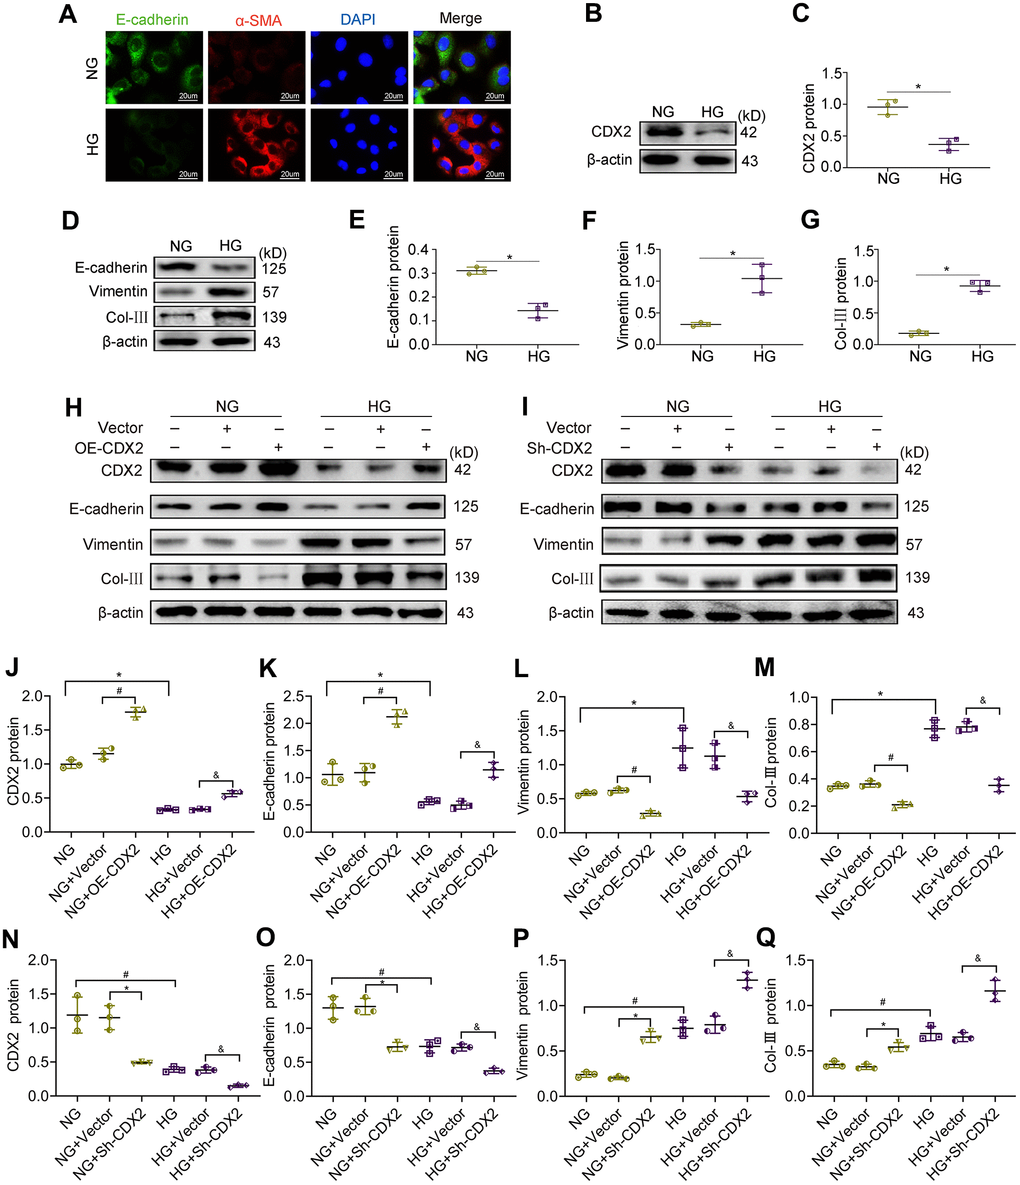 CDX2 overexpression alleviates hyperglycemia-induced RTECs damage, and CDX2 knockdown aggravates the damage. NRK-52E cells were administered NG (5.5 mM) and HG (25 mM) media for 48h, followed by analysis. (A) Immunofluorescence for E-cadherin and α-SMA detection in NRK-52E cells of the NG and HG groups, respectively (scale bar, 20μm). (B, C) Immunoblot bands of CDX2 (B) and quantitative data (C) in NRK-52E cells of the NG and HG groups. (D–G) Immunoblot bands of E-cadherin, Vimentin, and Col-III (D), and quantitative data (E–G) in NRK-52E cells of the NG and HG groups. H-Q Immunoblot bands of CDX2, E-cadherin, Vimentin, and Col-III in non-transfected (NG or HG treated) NRK-52E cells, and NRK-52E cells transfected with Vector (NG+Vector group, HG+Vector group), or CDX2-overexpressing (NG+OE-CDX2 group, HG+OE-CDX2 group) or CDX2-knockdown (NG+Sh-CDX2 group, HG+Sh-CDX2 group) (H, I); quantitative data are shown (J–Q). Data are mean±SD from three assays performed independently. n=3; *P#P&P